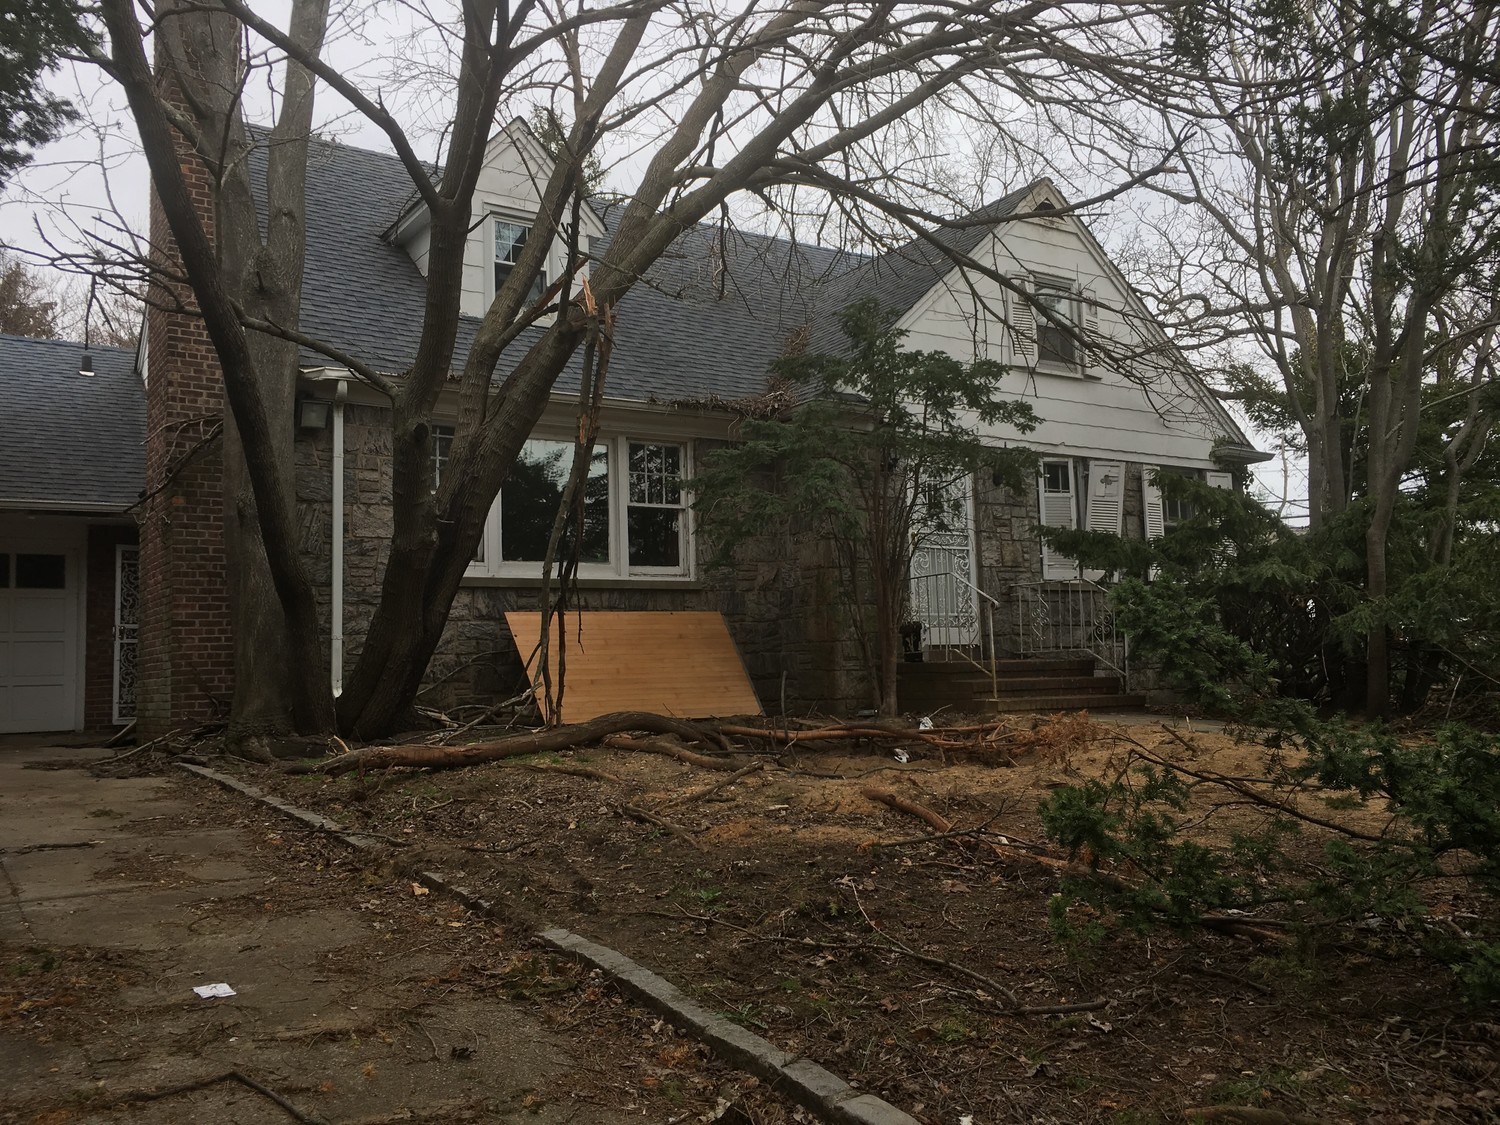 Plywood leans against the house’s walls and windows are smashed at 1 Wallace Court.